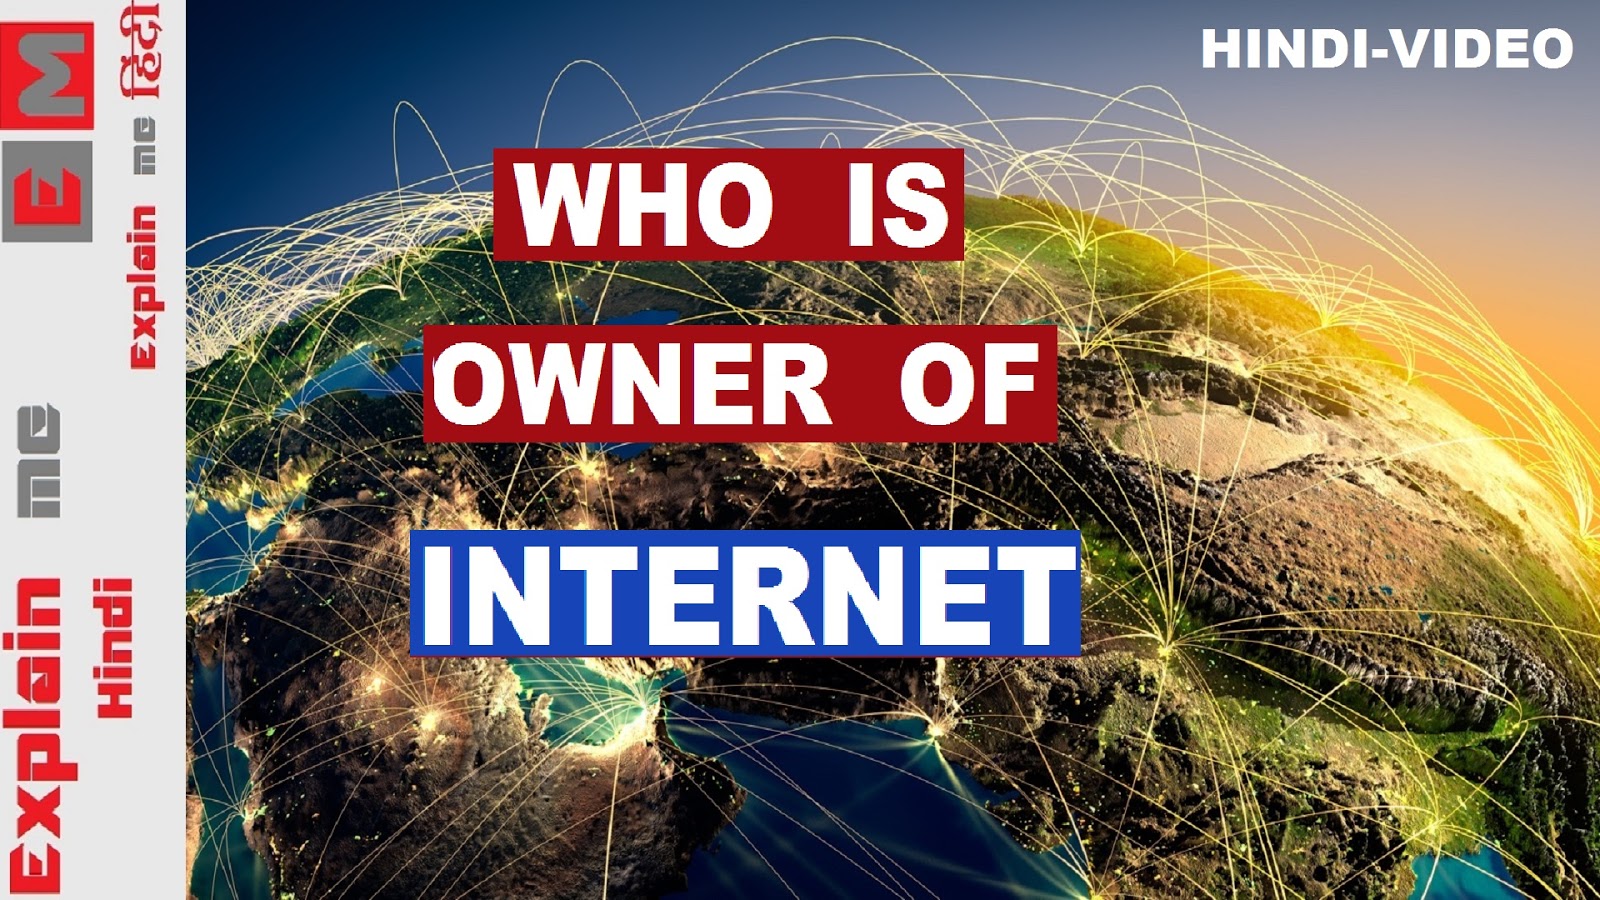 Who Owns The Internet Who Is Owner Of Internet Hindi Viral Video By